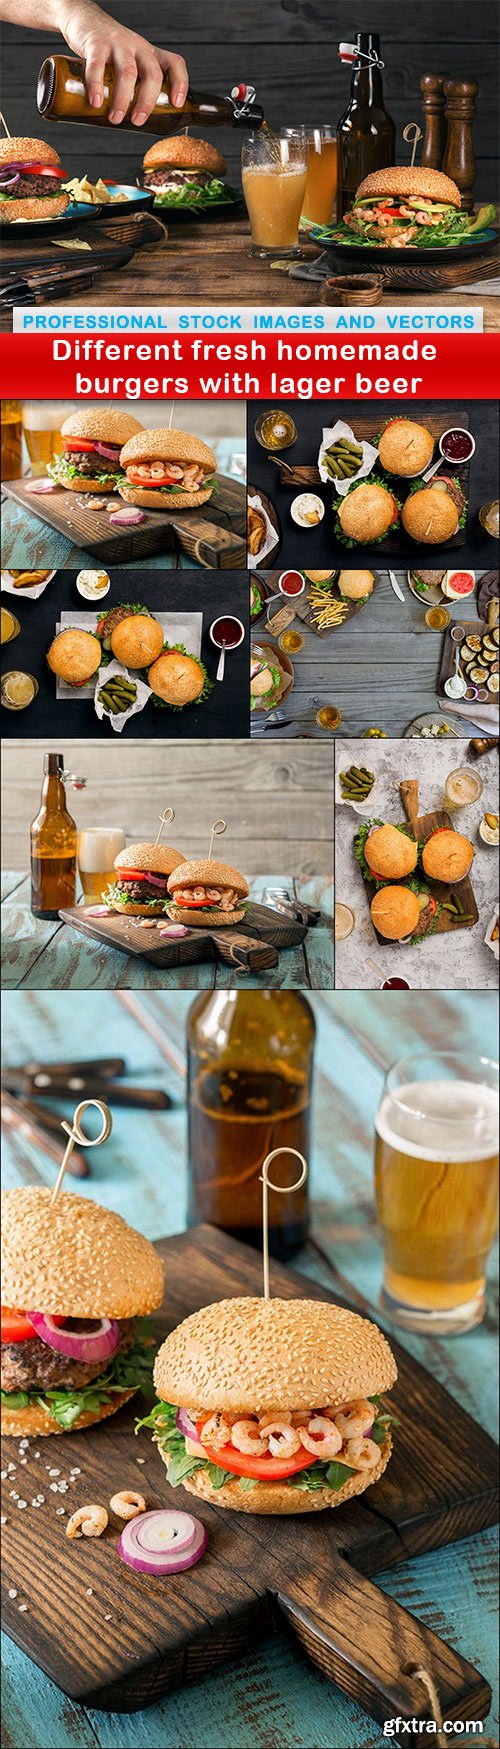 Different fresh homemade burgers with lager beer - 8 UHQ JPEG